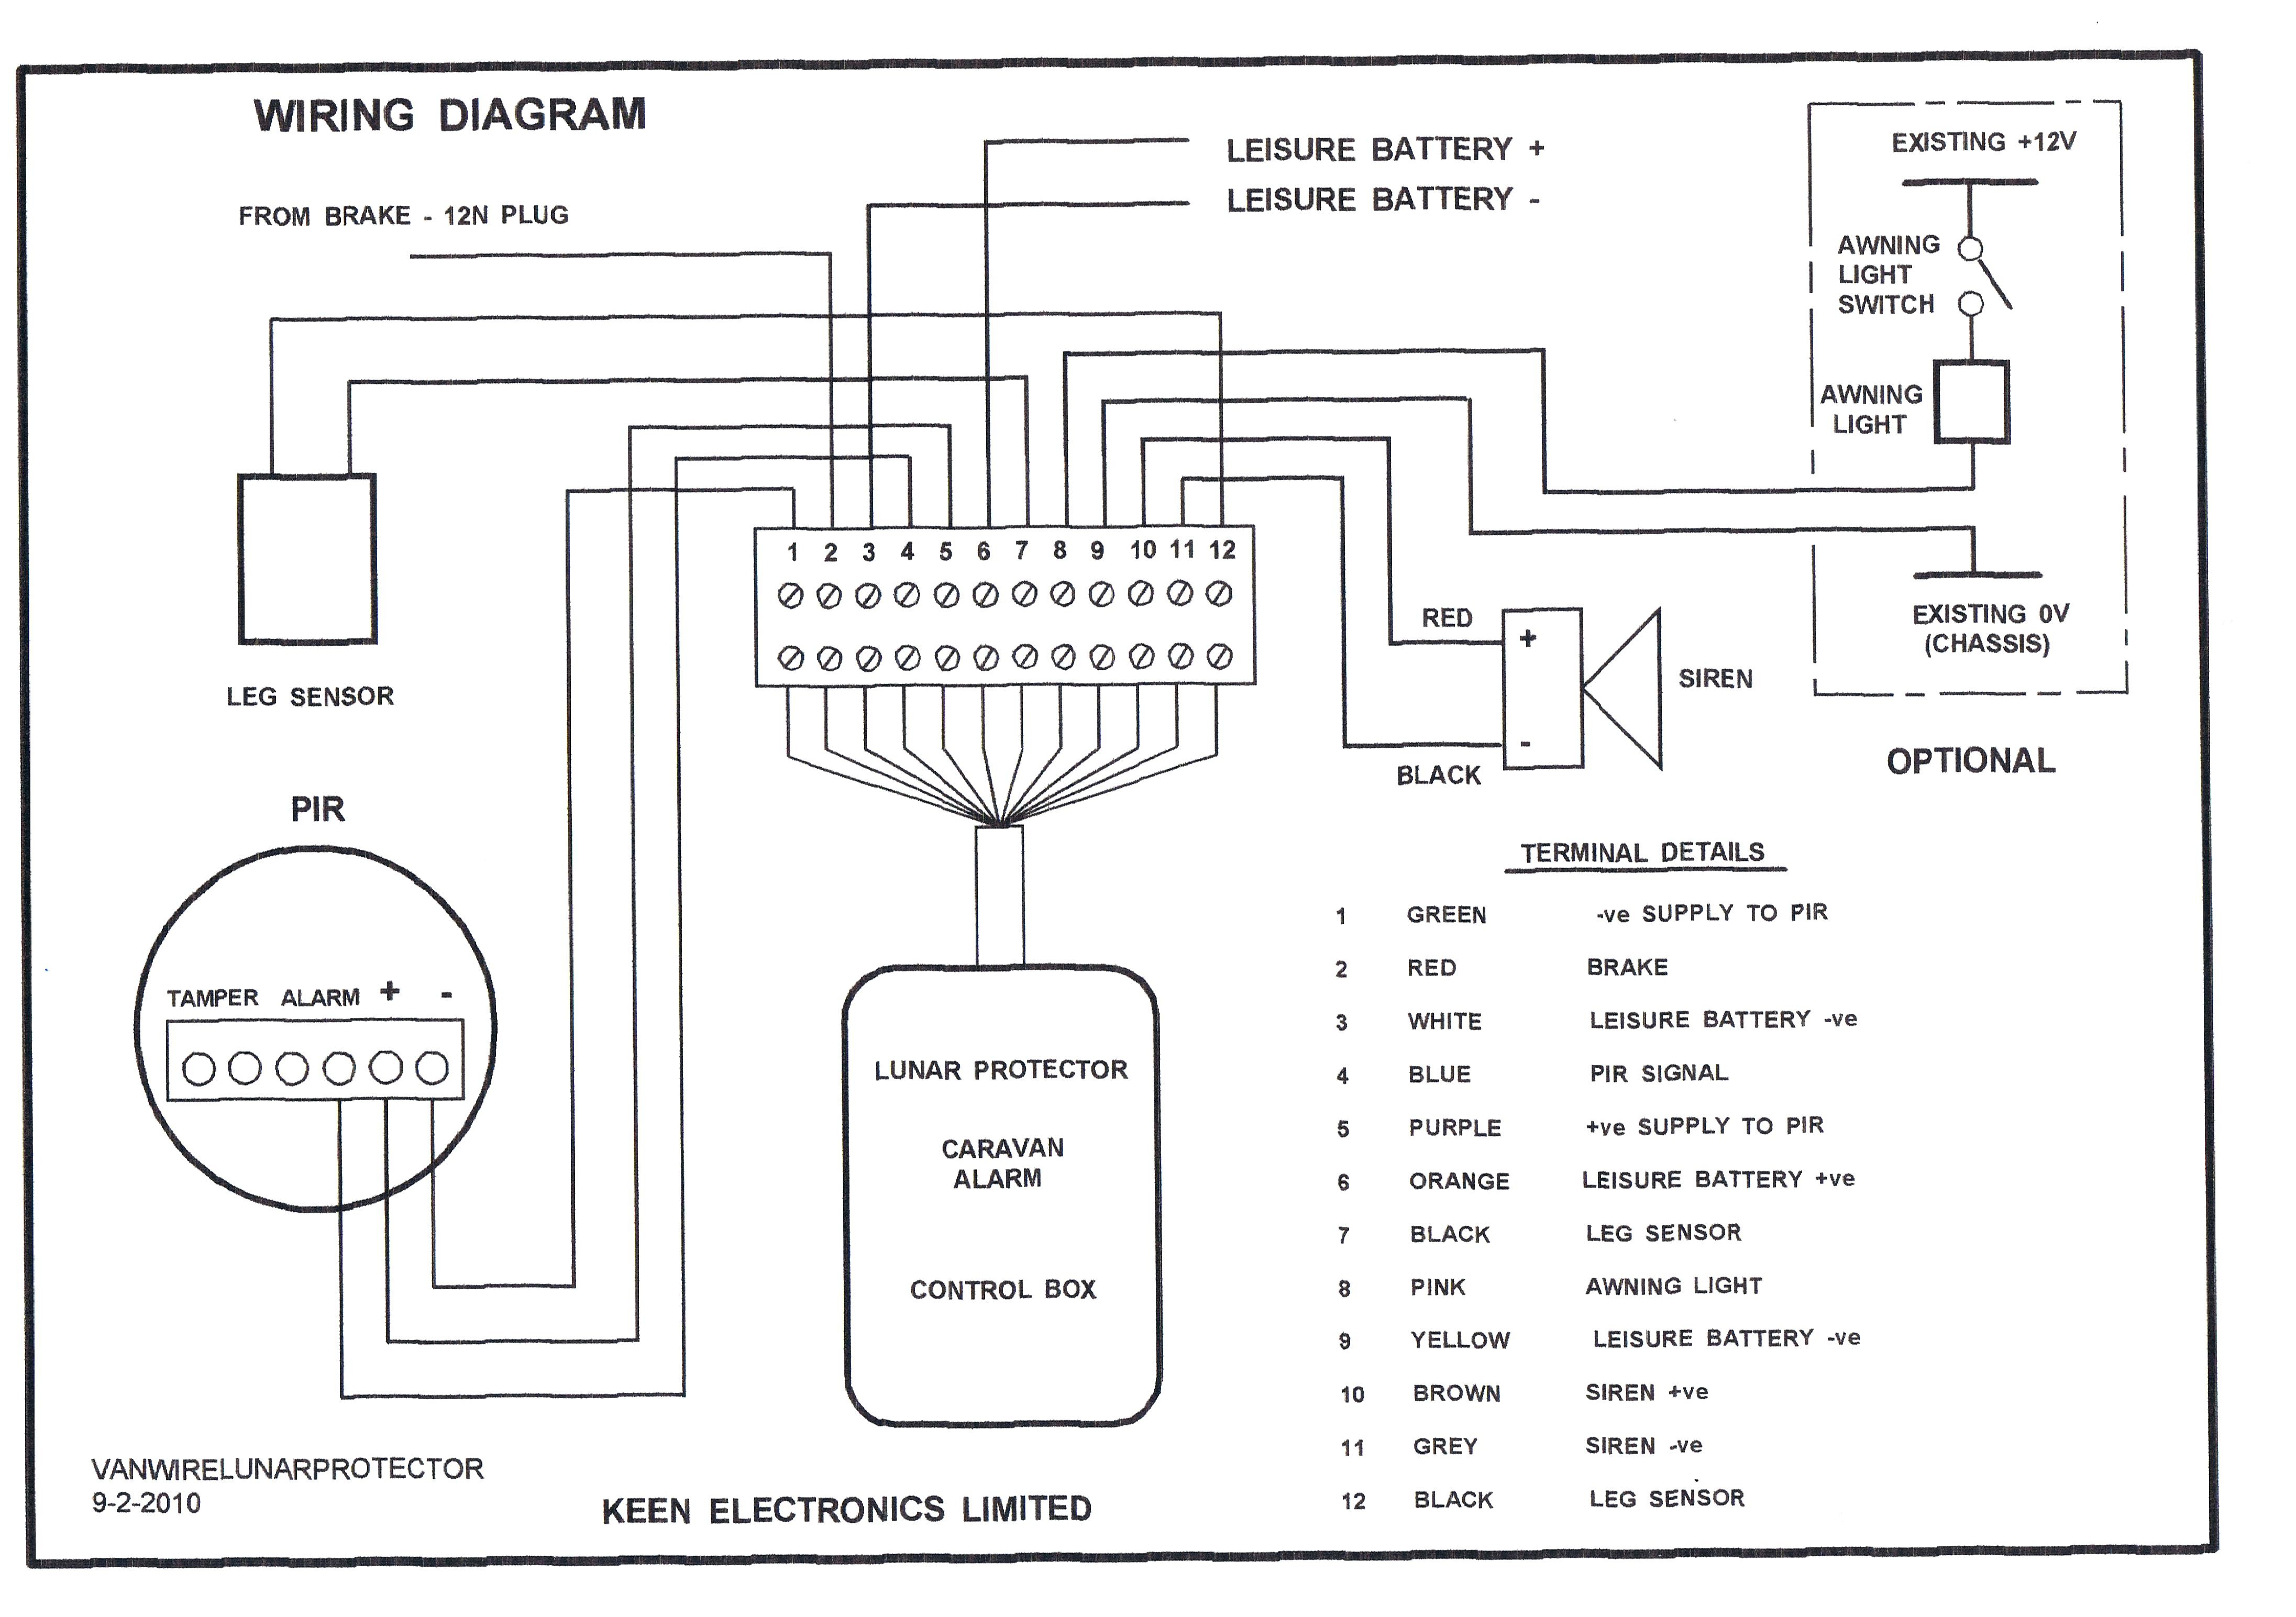 Ansul System Wiring Diagram New Ansul System Wiring Diagram Best